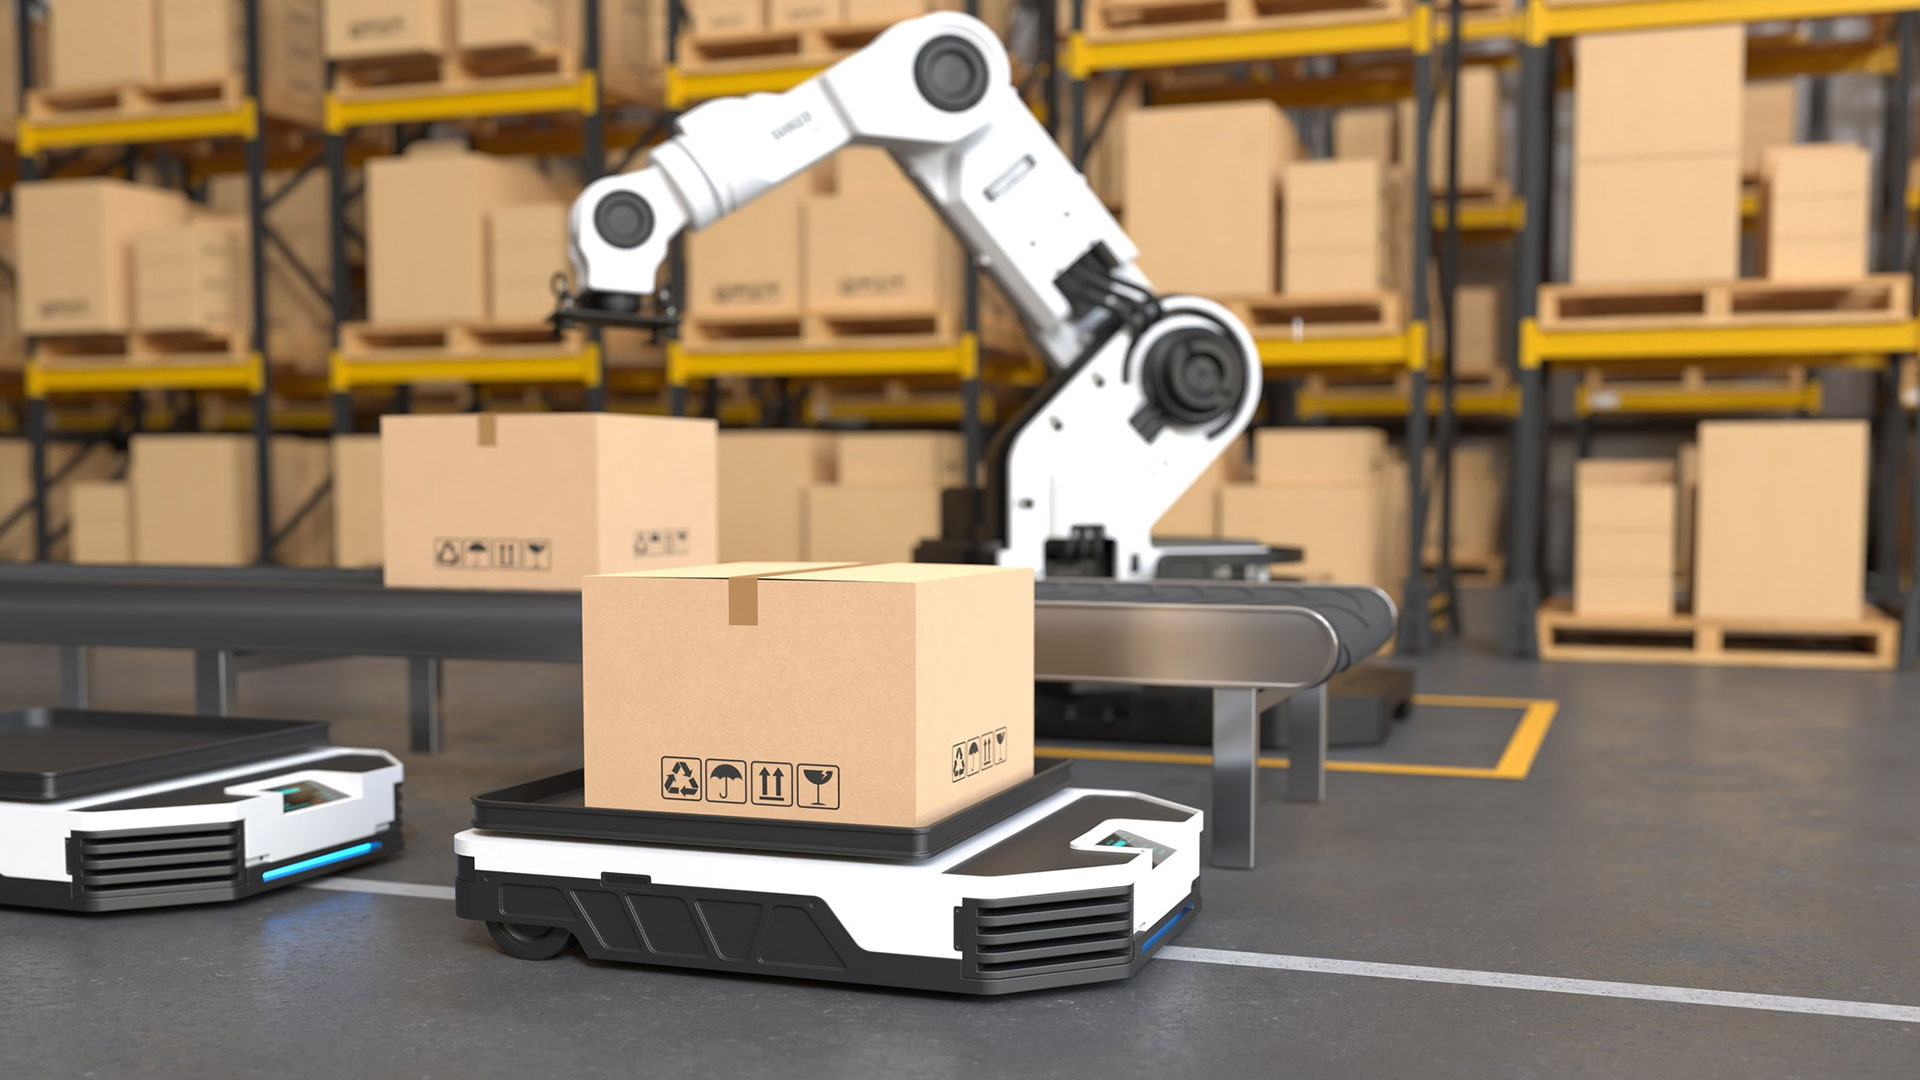 Robot handling packaging boxes in a warehouse.